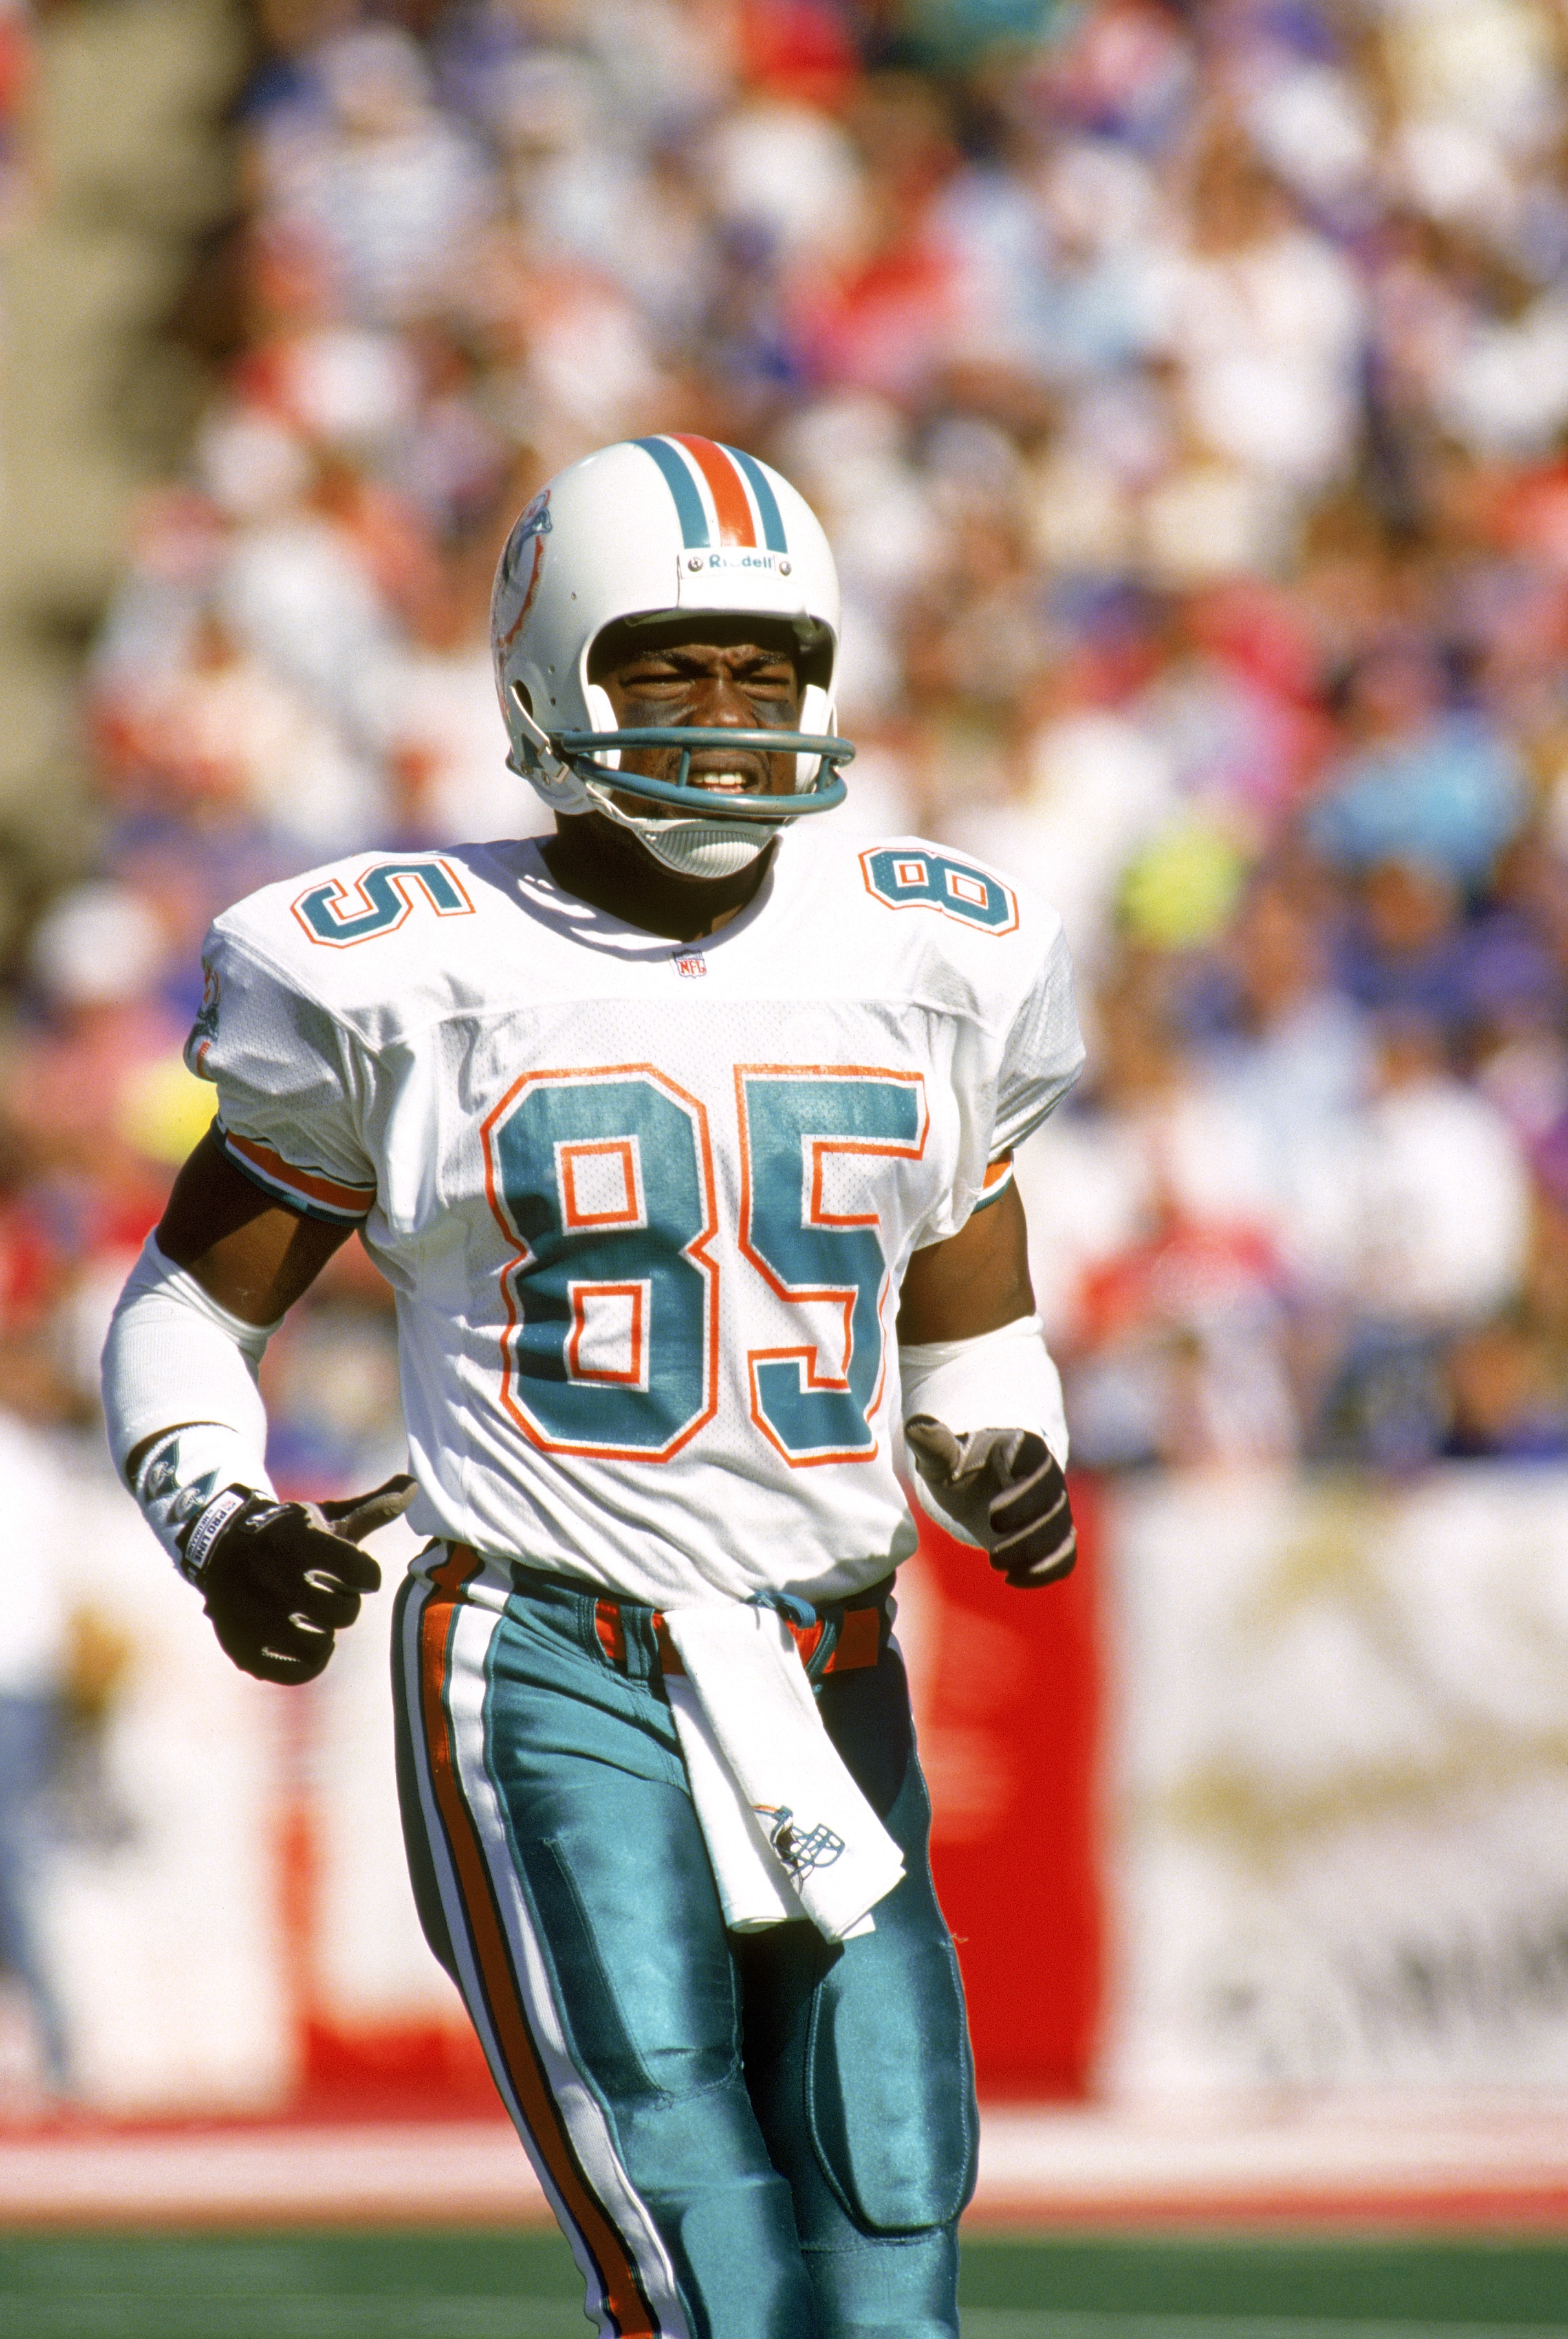 ORCHARD PARK, NY - OCTOBER 4:  Wide receiver Mark Duper #85 of the Miami Dolphins runs on the field during a game against the Buffalo Bills at Ralph Wilson Stadium on October 4, 1992 in Orchard Park, New York.  The Dolphins won 37-10.  (Photo by Rick Stew